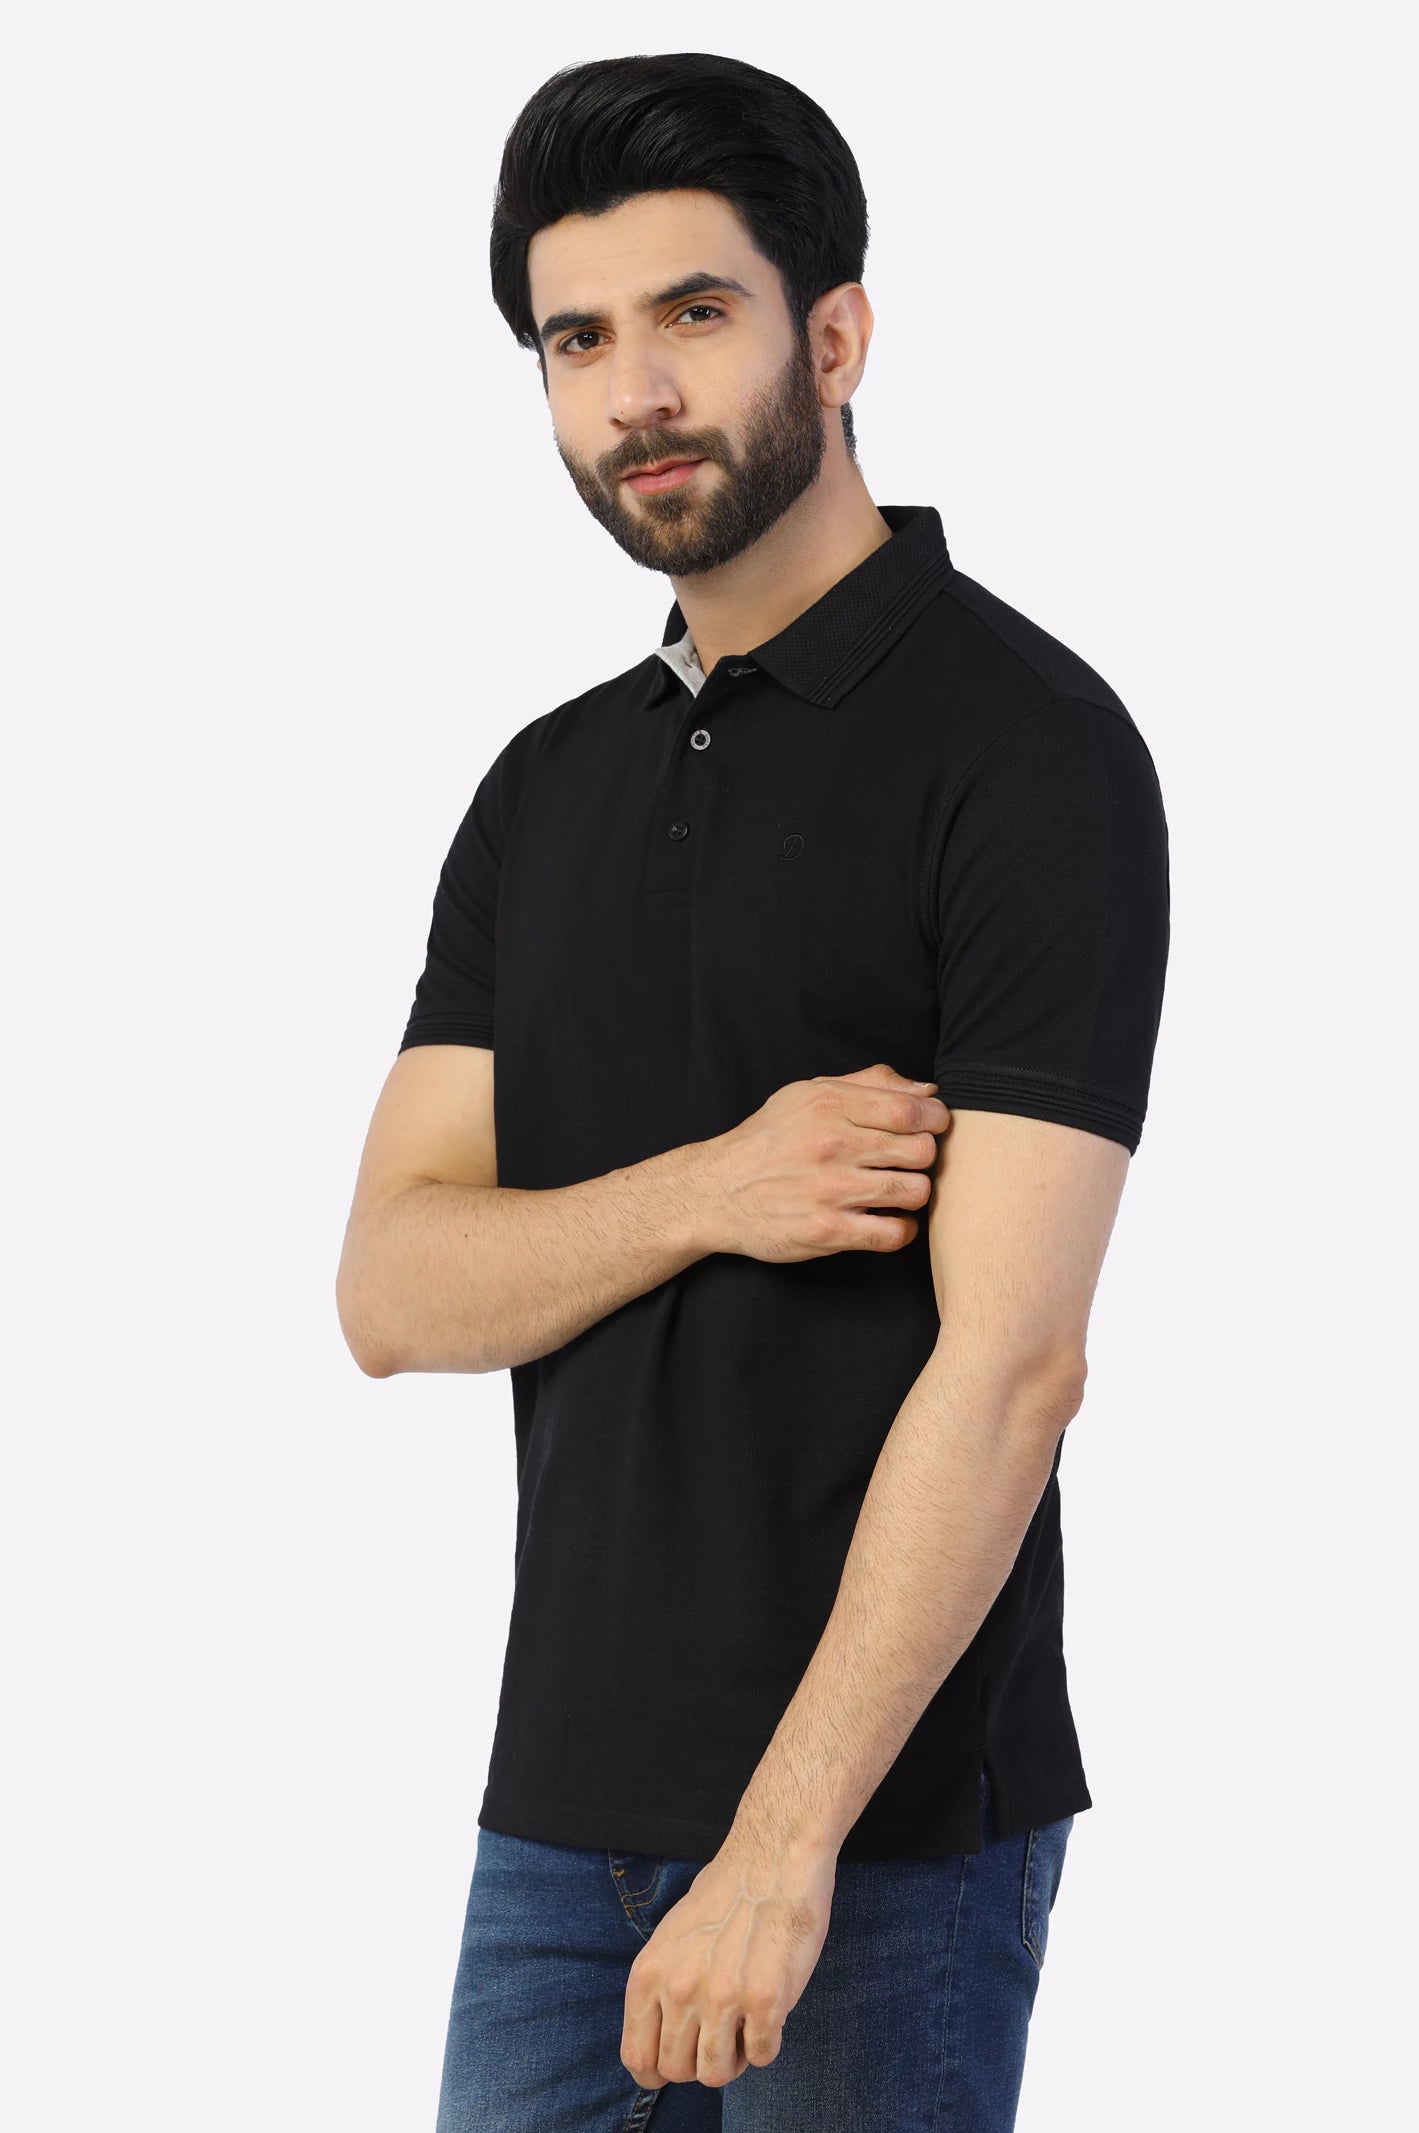 Black Jacquard Collar Polo From Diners